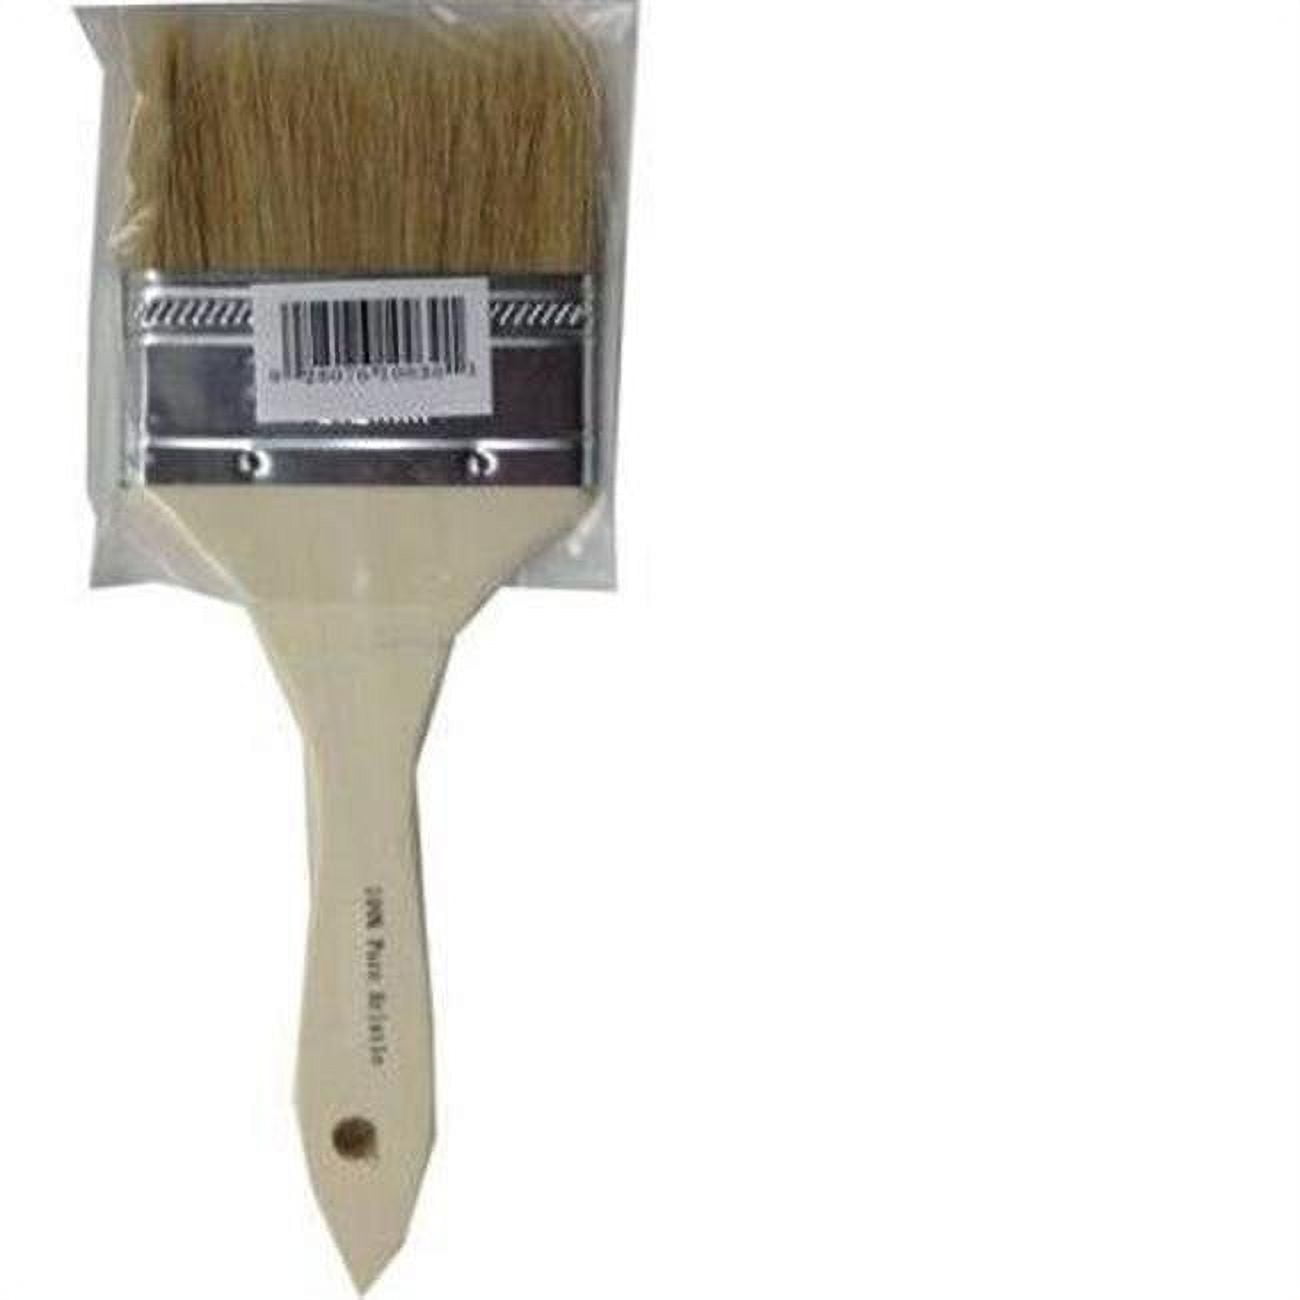 4 Varnish/Chip Brushes disposable for paint and resins - Multi